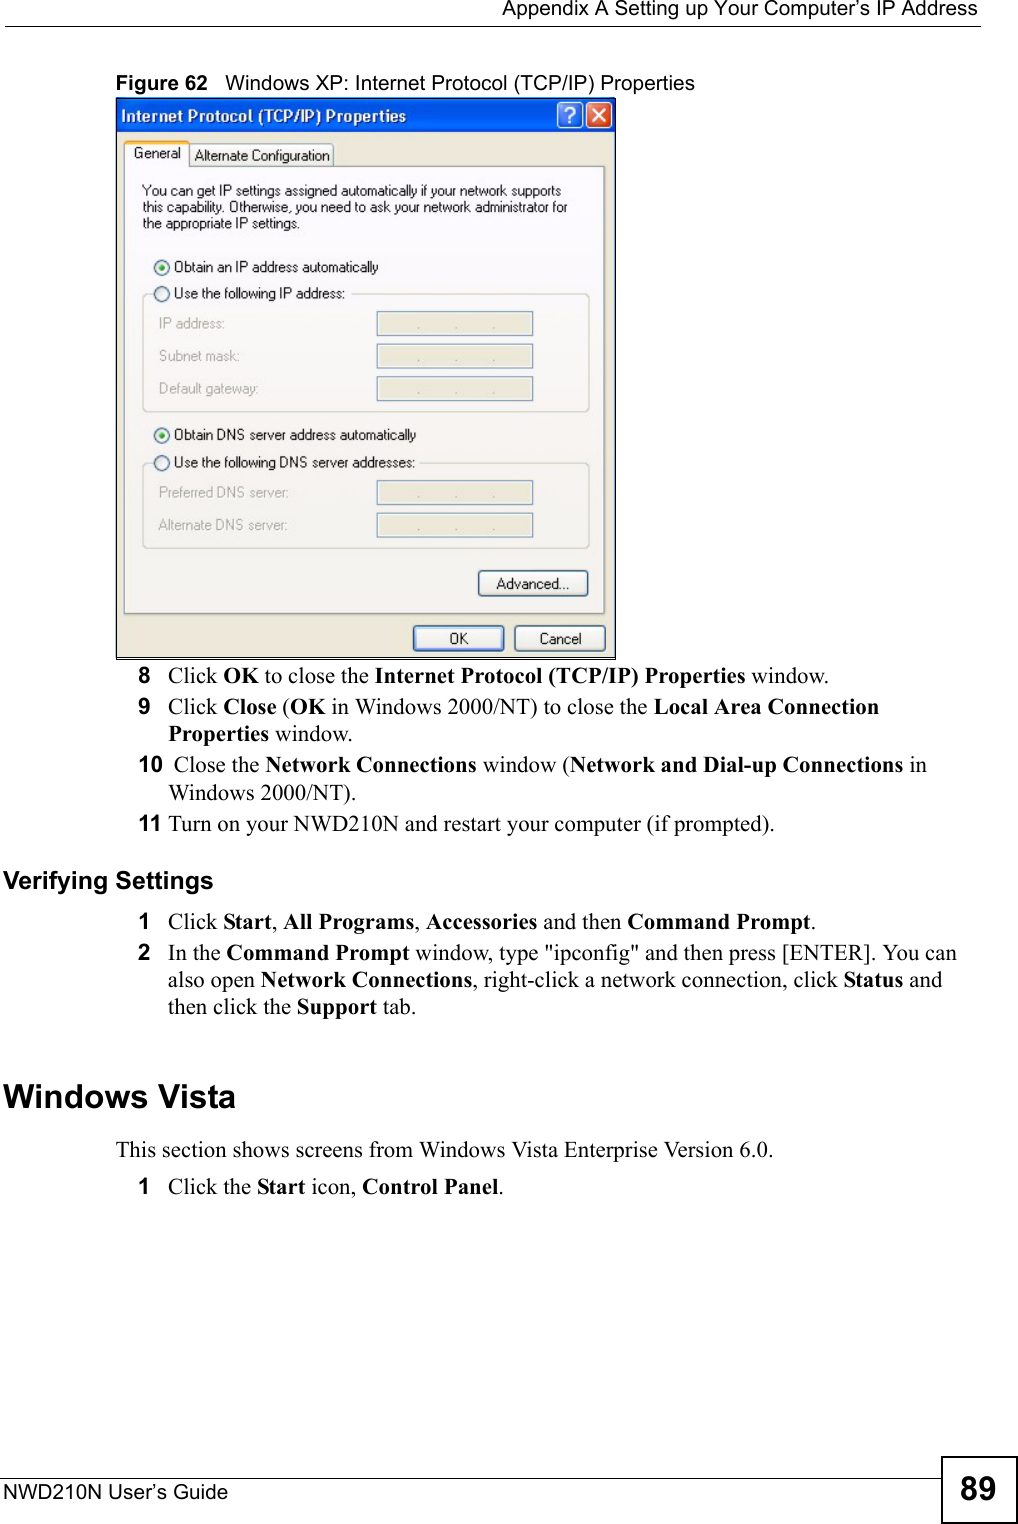  Appendix A Setting up Your Computer’s IP AddressNWD210N User’s Guide 89Figure 62   Windows XP: Internet Protocol (TCP/IP) Properties8Click OK to close the Internet Protocol (TCP/IP) Properties window.9Click Close (OK in Windows 2000/NT) to close the Local Area Connection Properties window.10  Close the Network Connections window (Network and Dial-up Connections in Windows 2000/NT).11 Turn on your NWD210N and restart your computer (if prompted).Verifying Settings1Click Start, All Programs, Accessories and then Command Prompt.2In the Command Prompt window, type &quot;ipconfig&quot; and then press [ENTER]. You can also open Network Connections, right-click a network connection, click Status and then click the Support tab.Windows VistaThis section shows screens from Windows Vista Enterprise Version 6.0.1Click the Start icon, Control Panel.